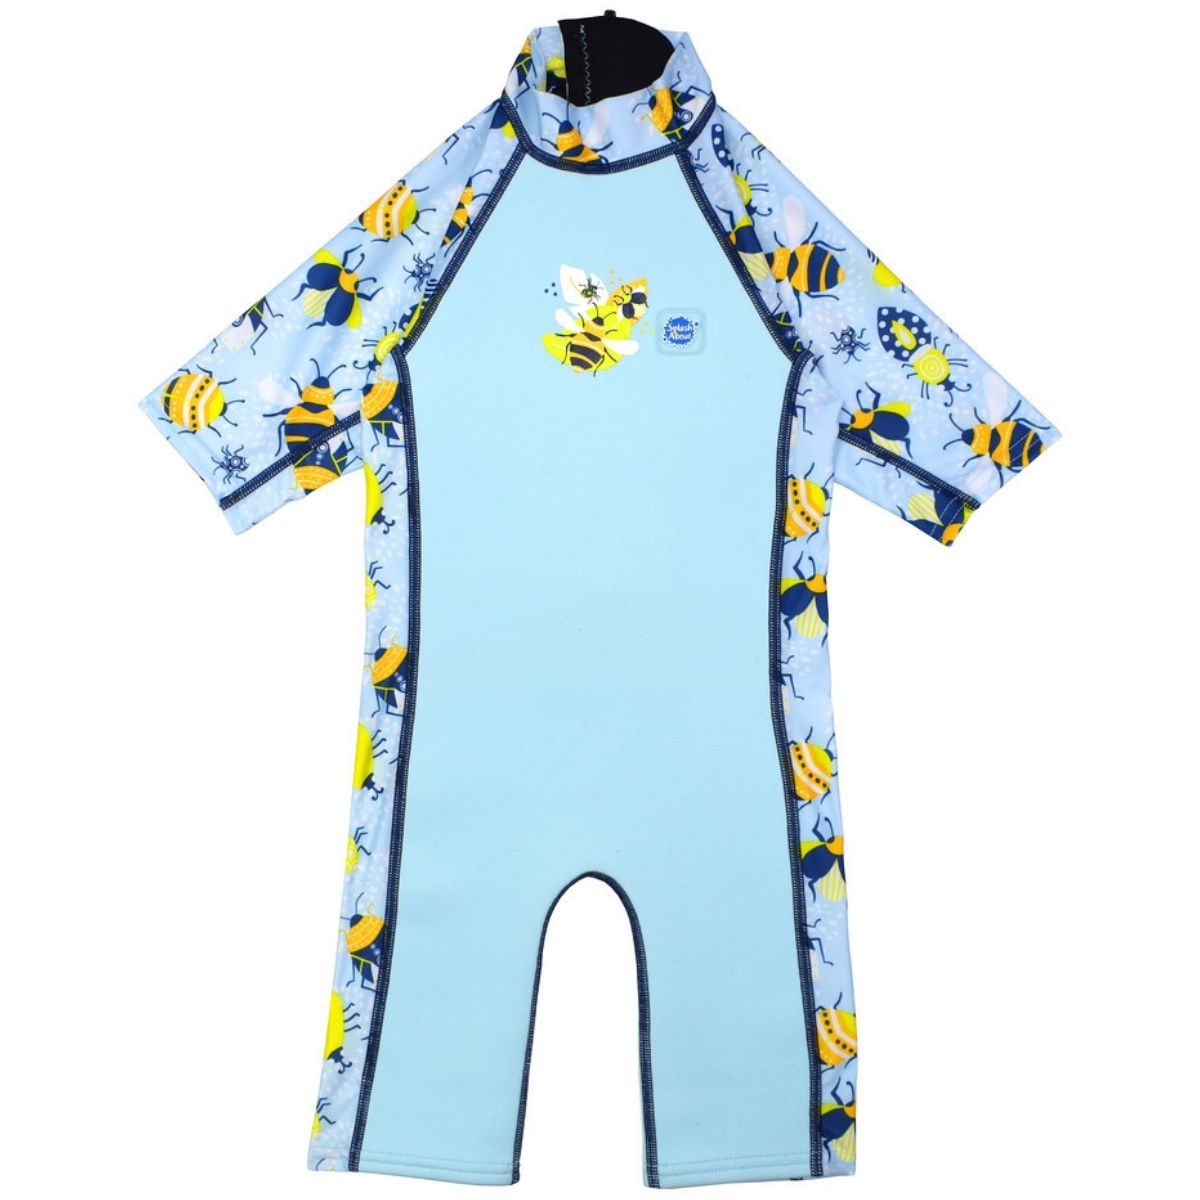 One piece UV sun and sea wetsuit for toddlers in light blue with navy blue trims. Insects themed print on sleeves, side panels, neck and chest. Front.